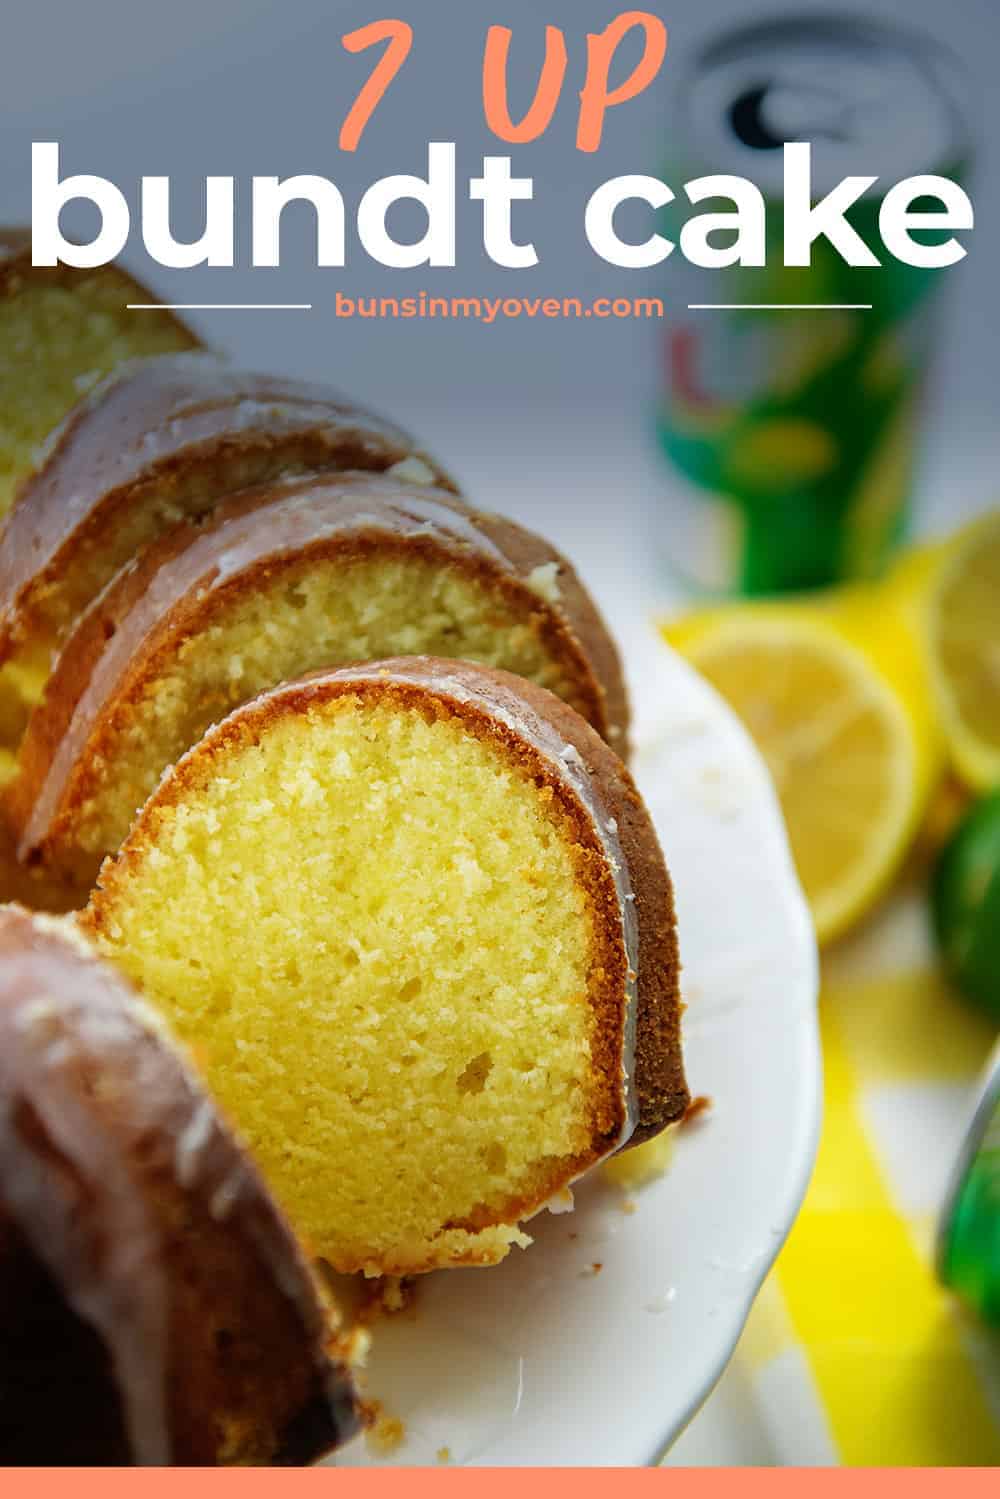 7 up pound cake on white cake stand with text for Pinterest.